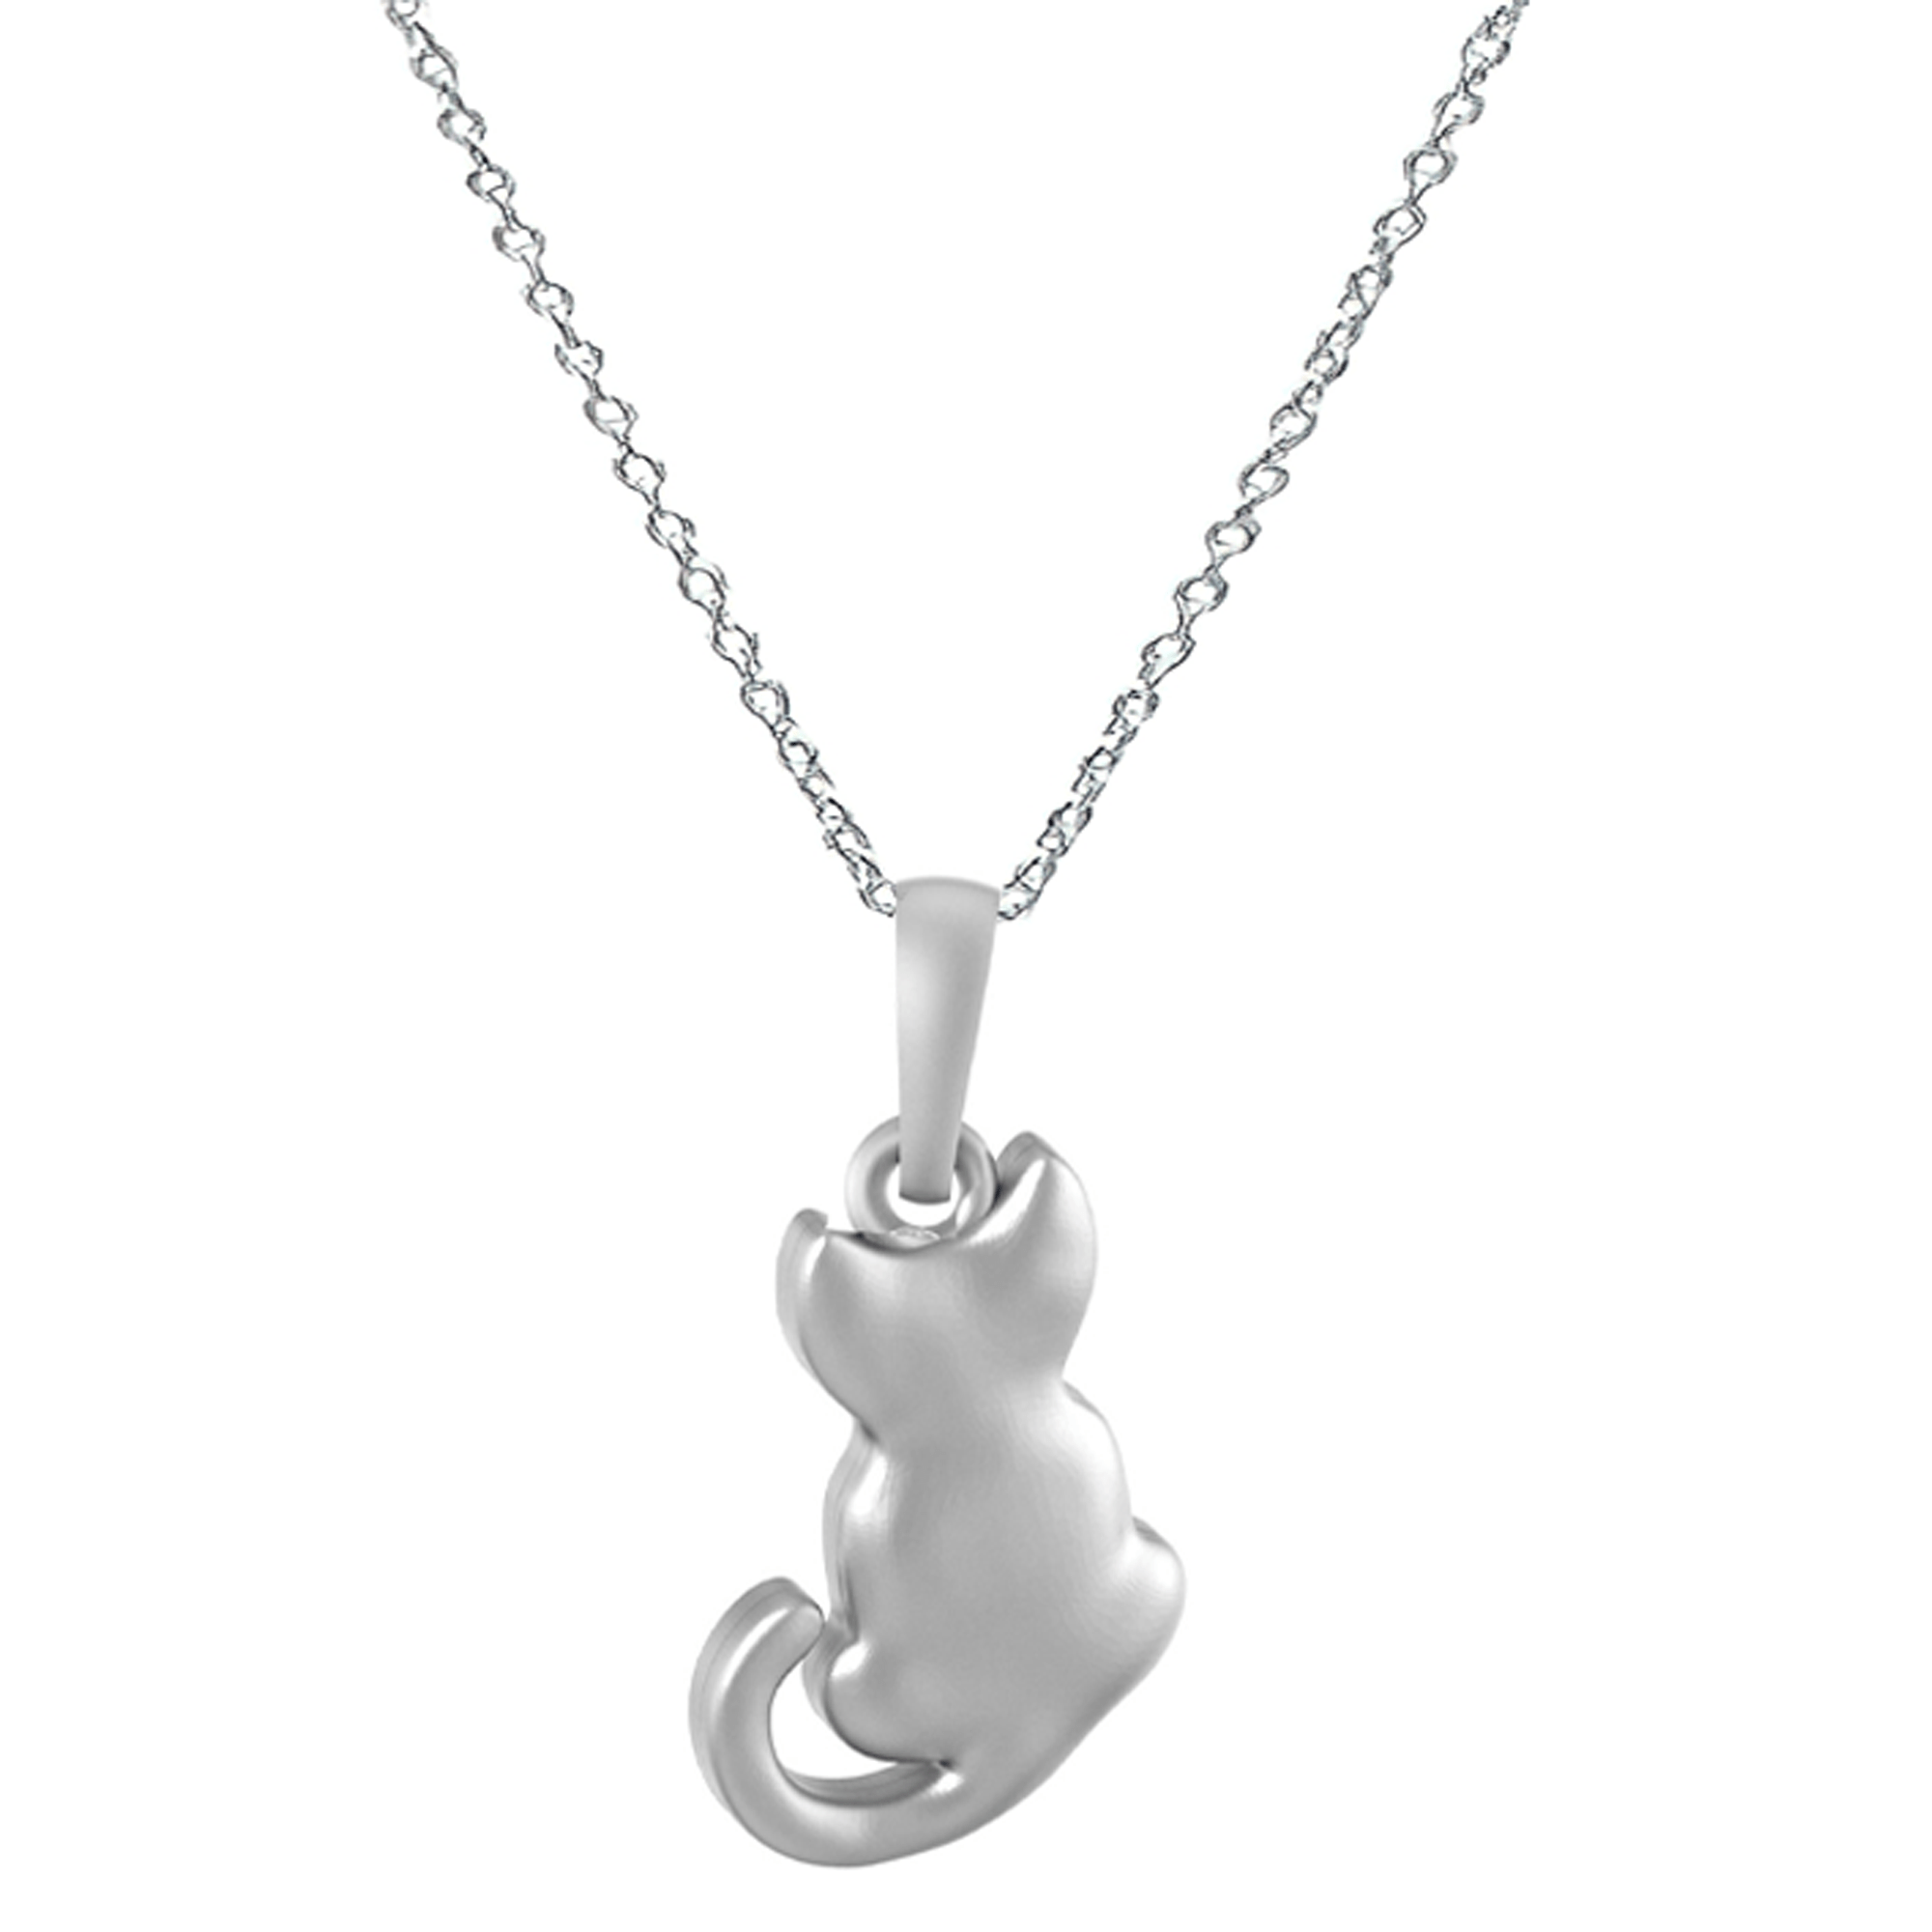 Akshat Sapphire Sterling Silver (92.5% purity) Stylish and Fashionable Cute Cat Chain Pendant (Pendant with Anchor Chain-22 inches) for Men & Women Pure Silver Cat Chain Locket for Happiness and joy